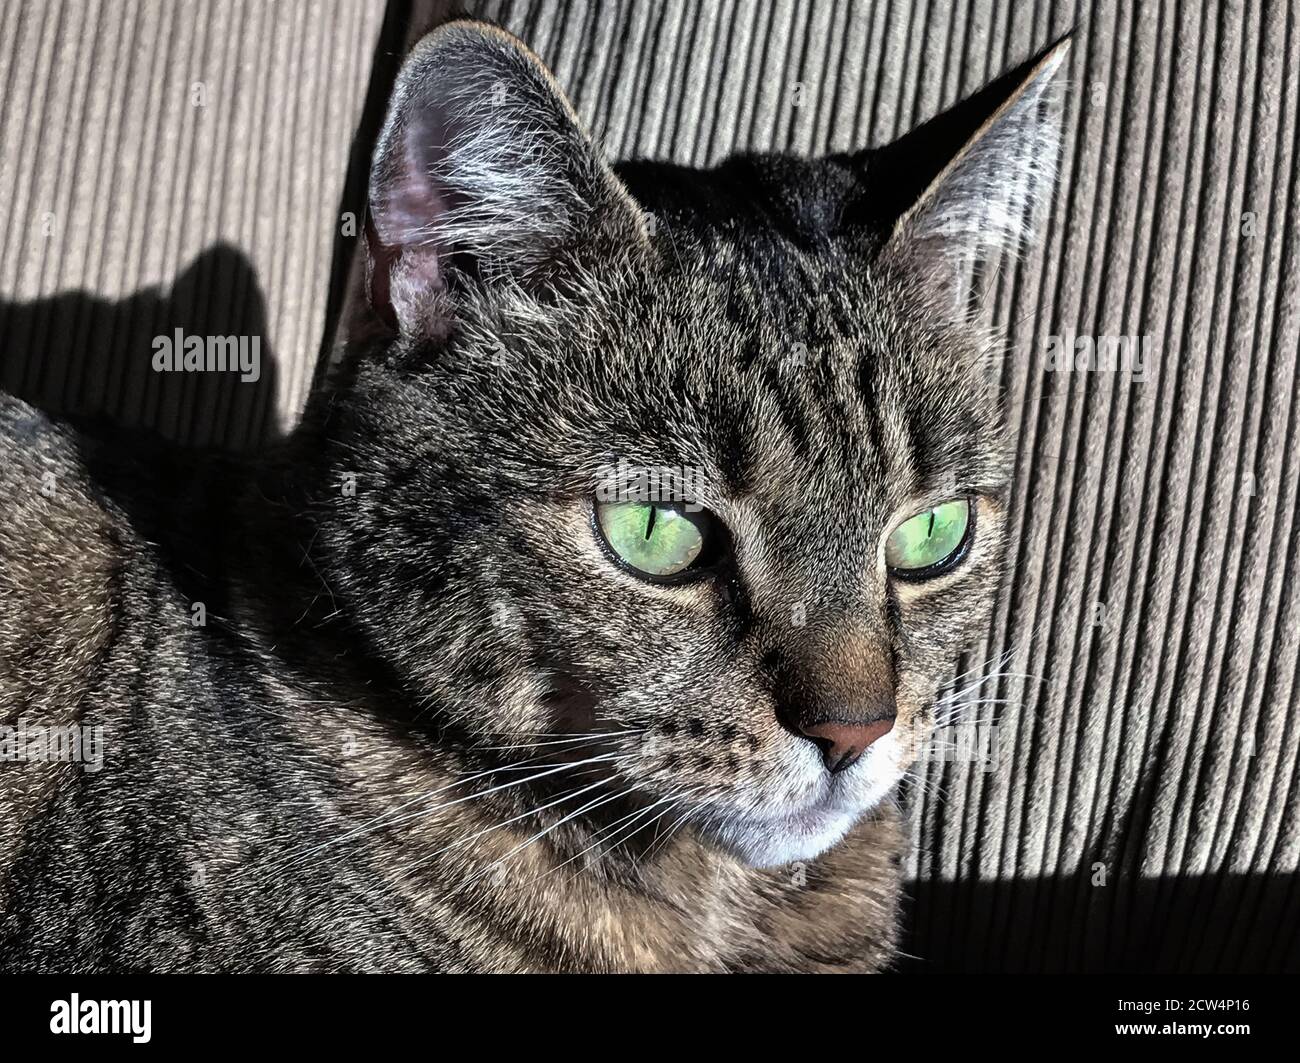 Portrait of a tabby cat with green eyes. Stock Photo